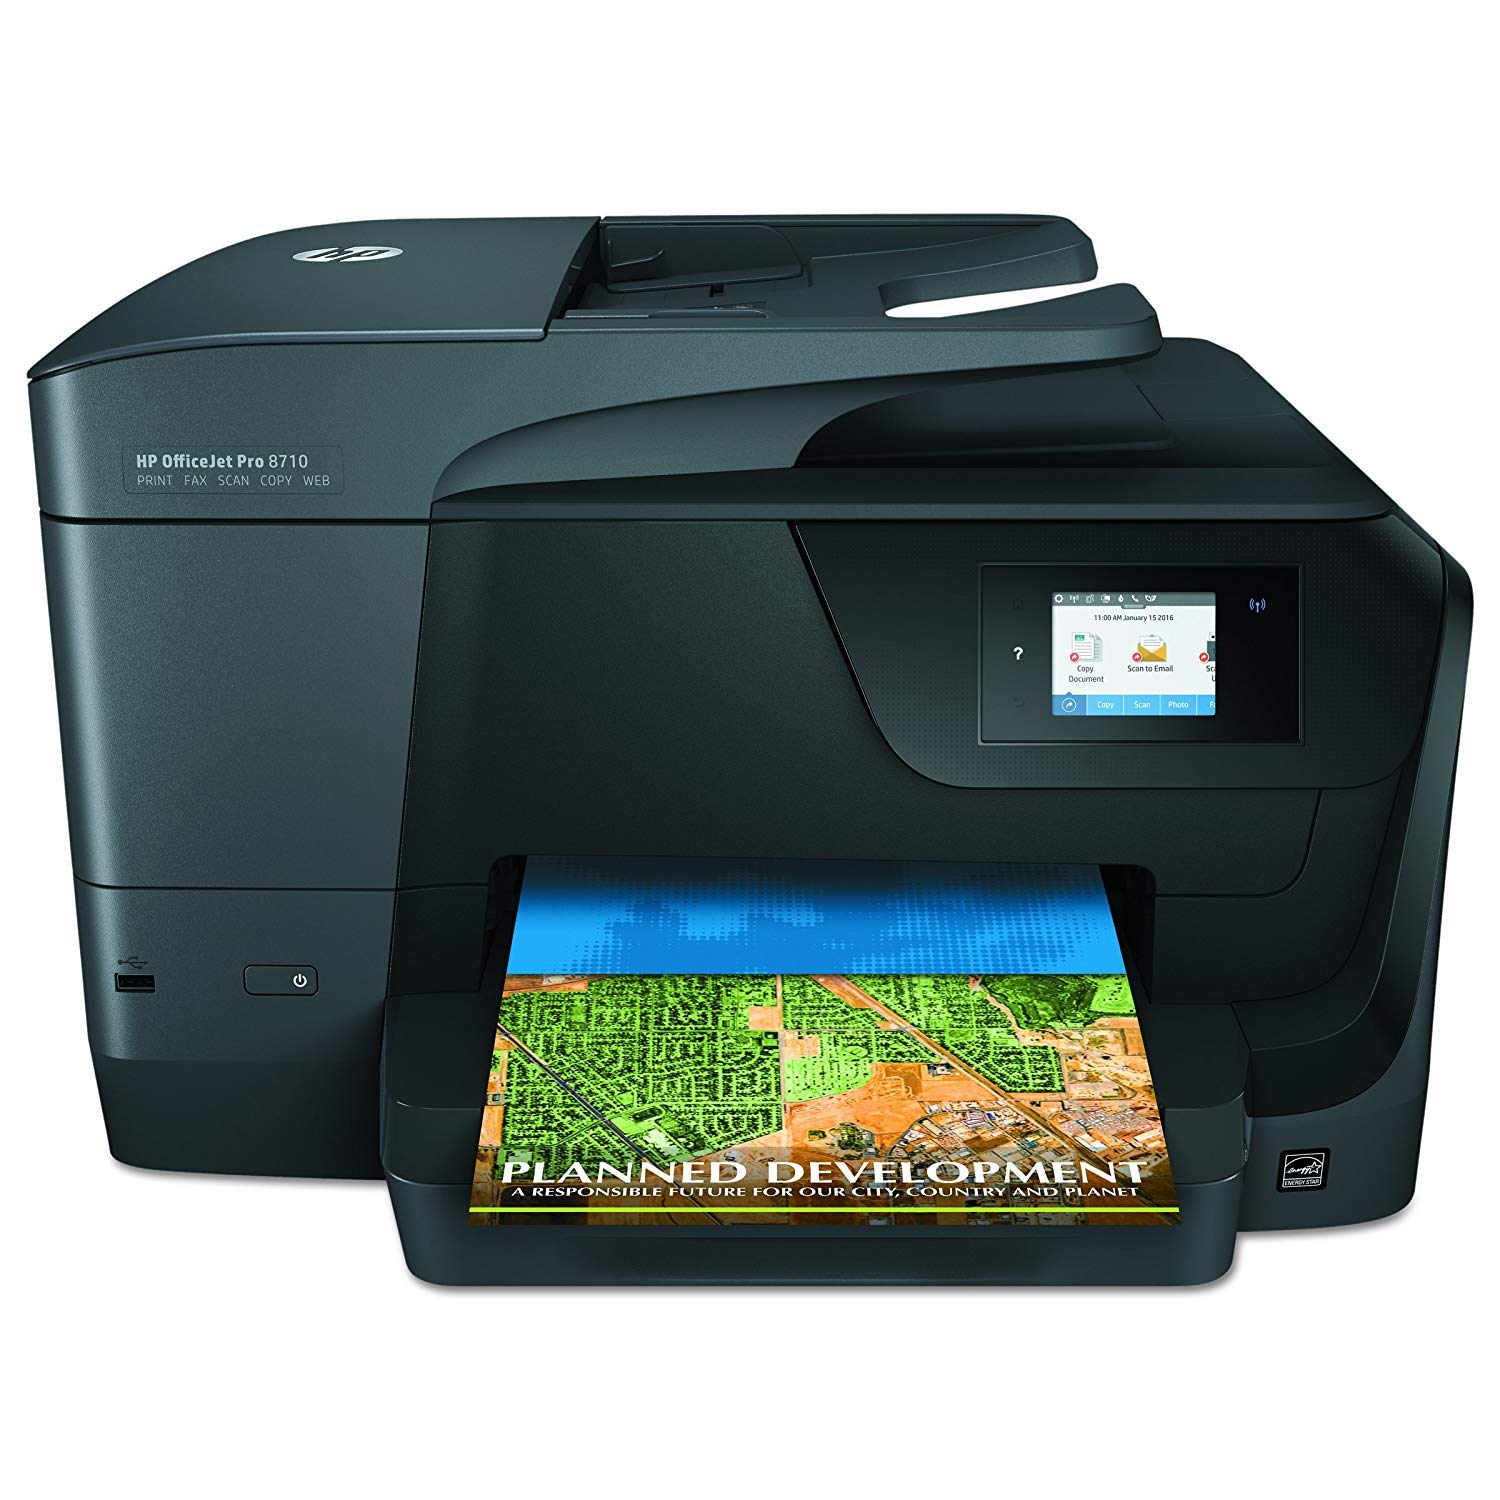 Hewlett Packard OfficeJet Pro 8710 Wireless All-in-One Photo Printer with Mobile Printing, Instant Ink ready (M9L66A)